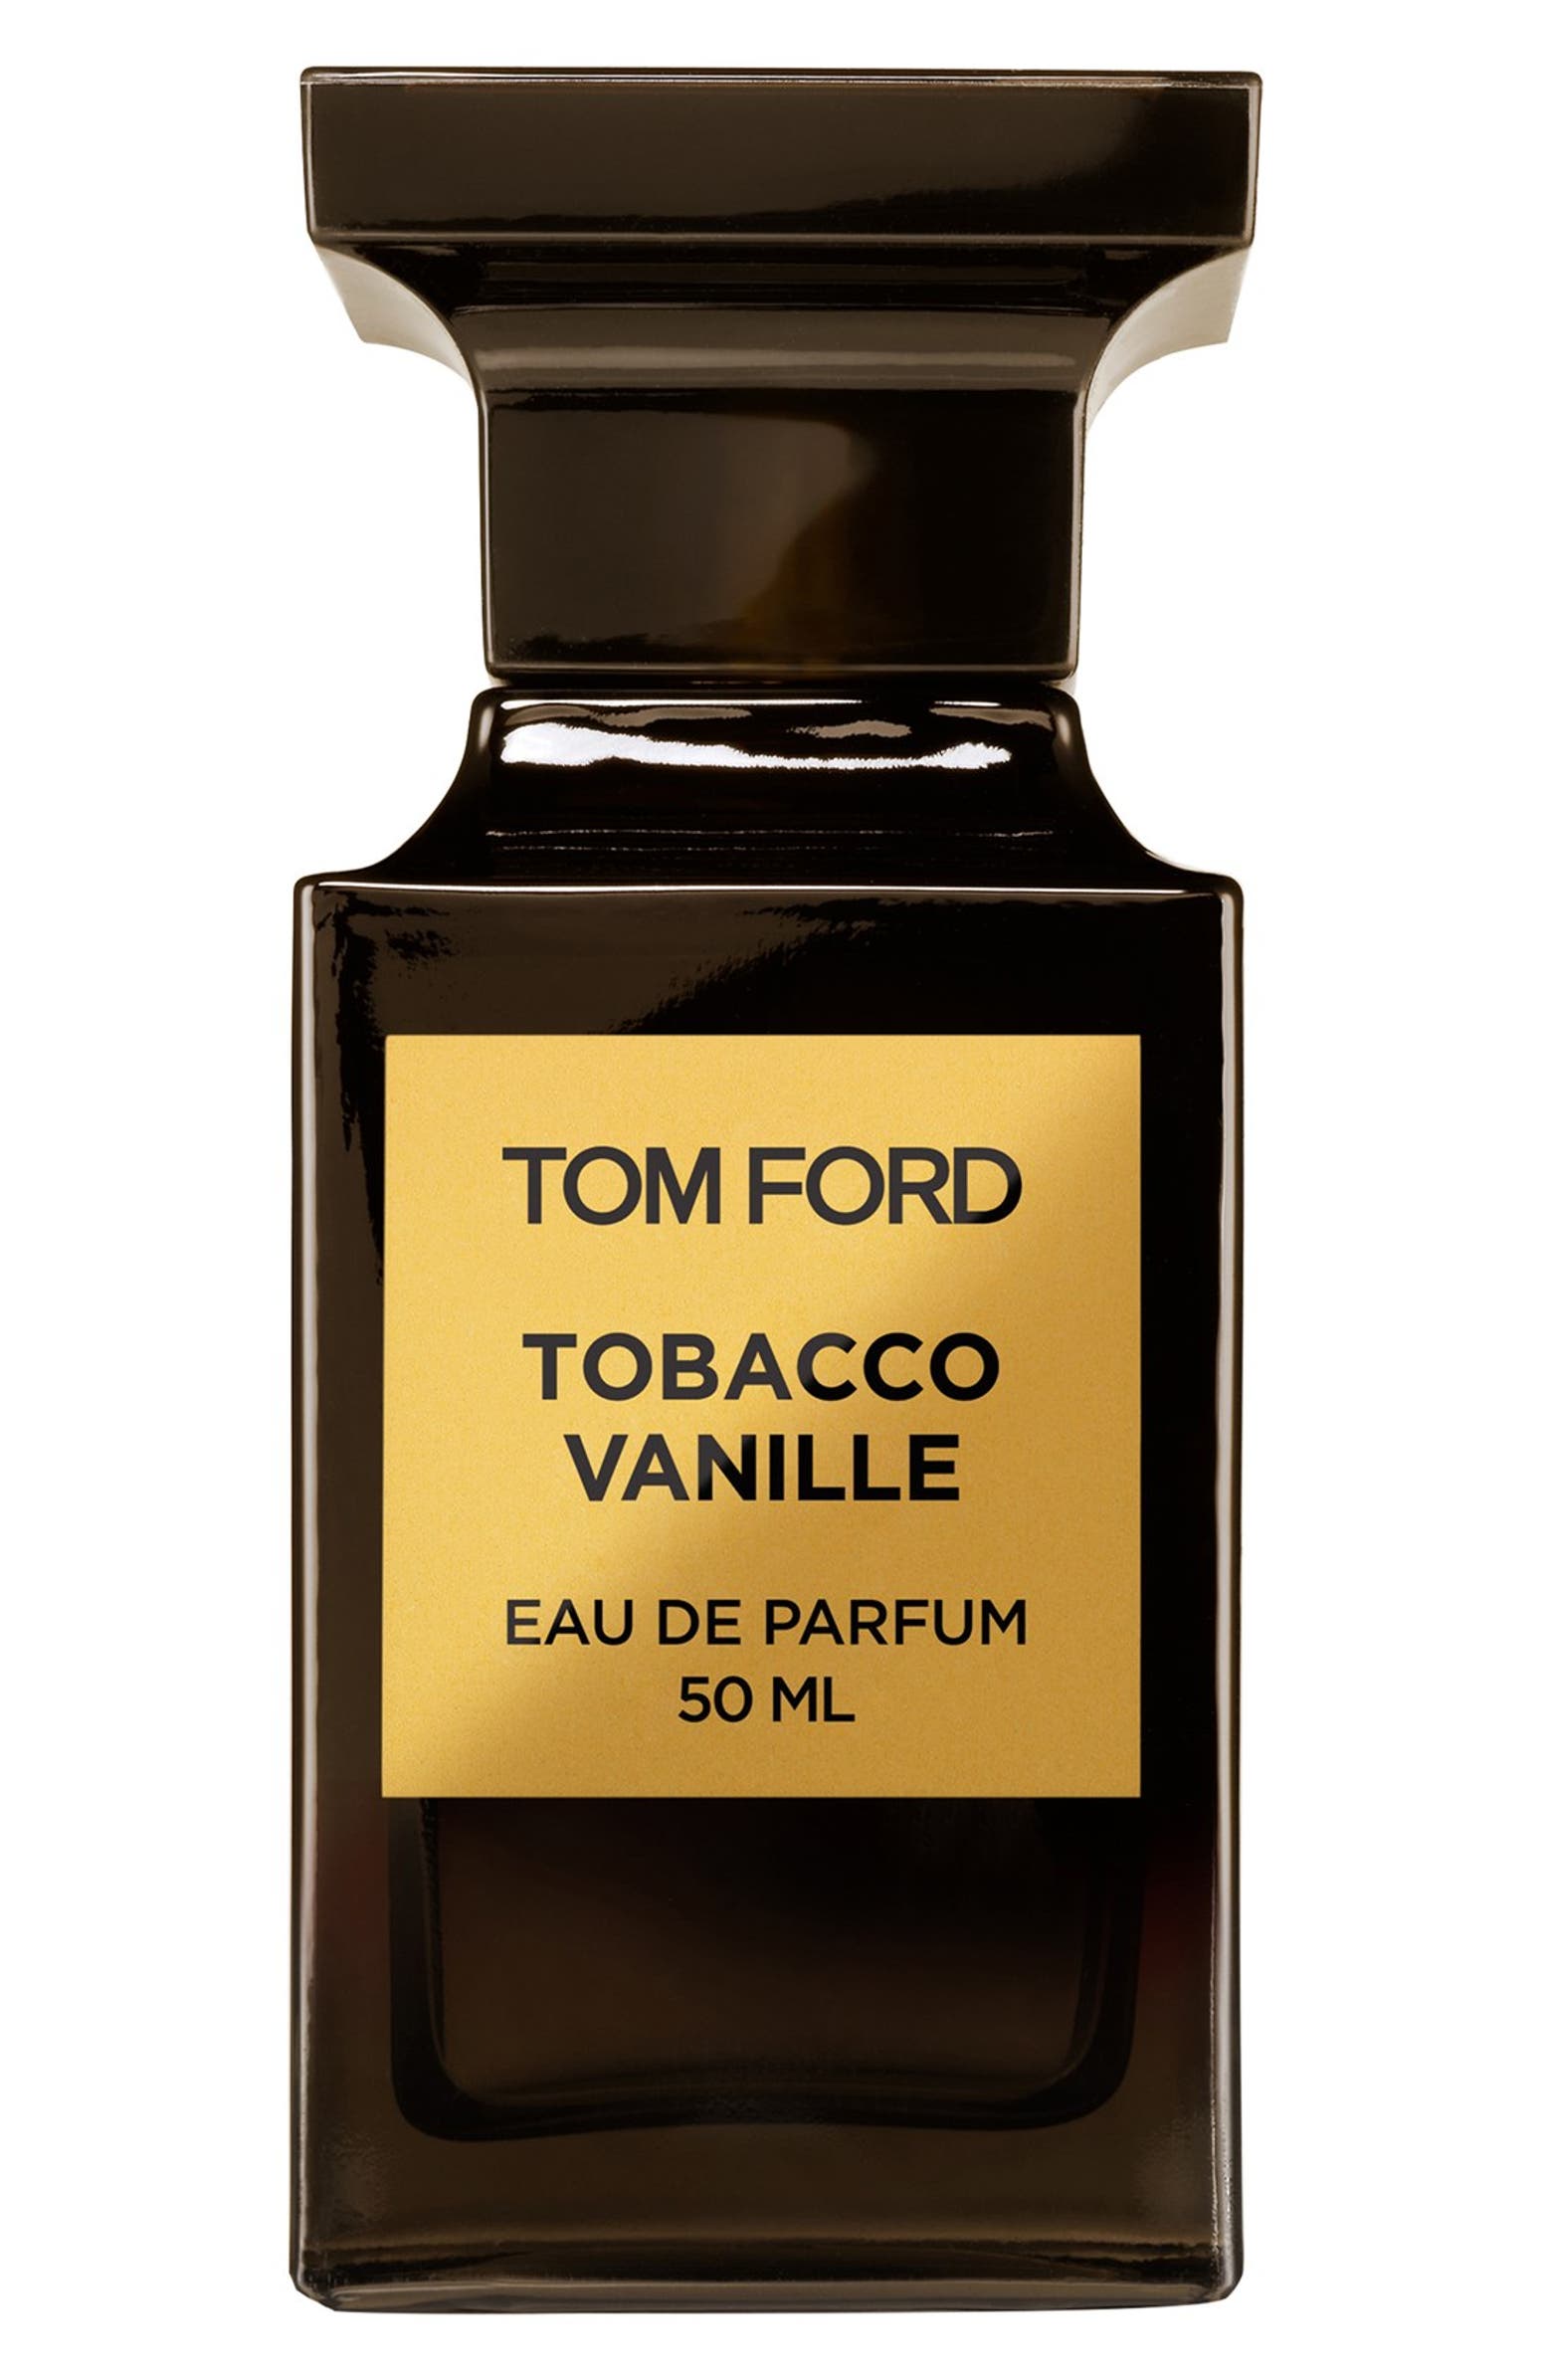 Tom Ford Tobacco Vanille cologne